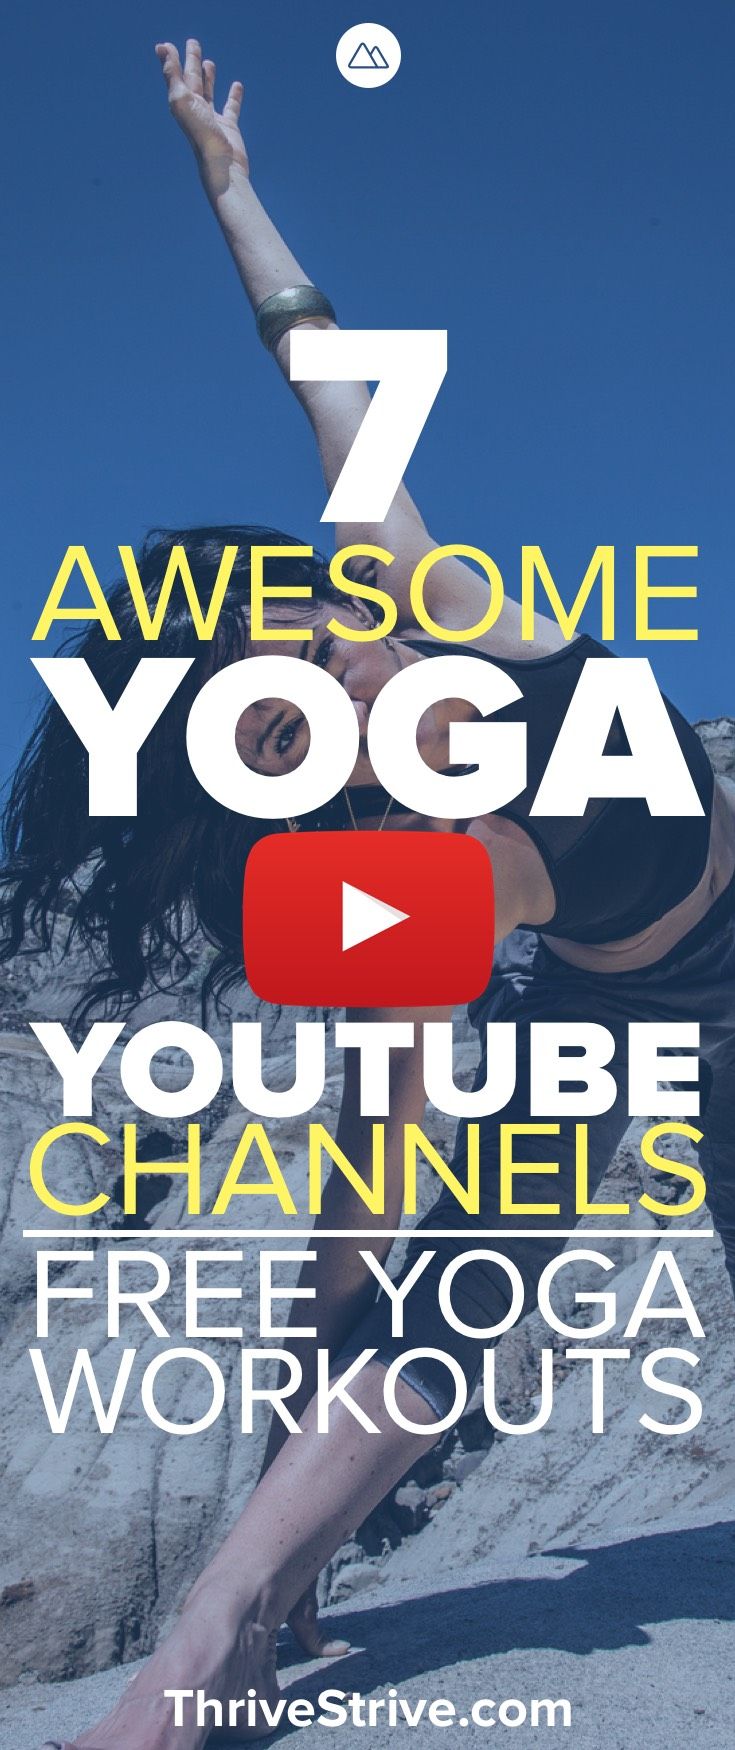 Looking to get started with yoga? Here are 7 awesome youtube channels that are g...